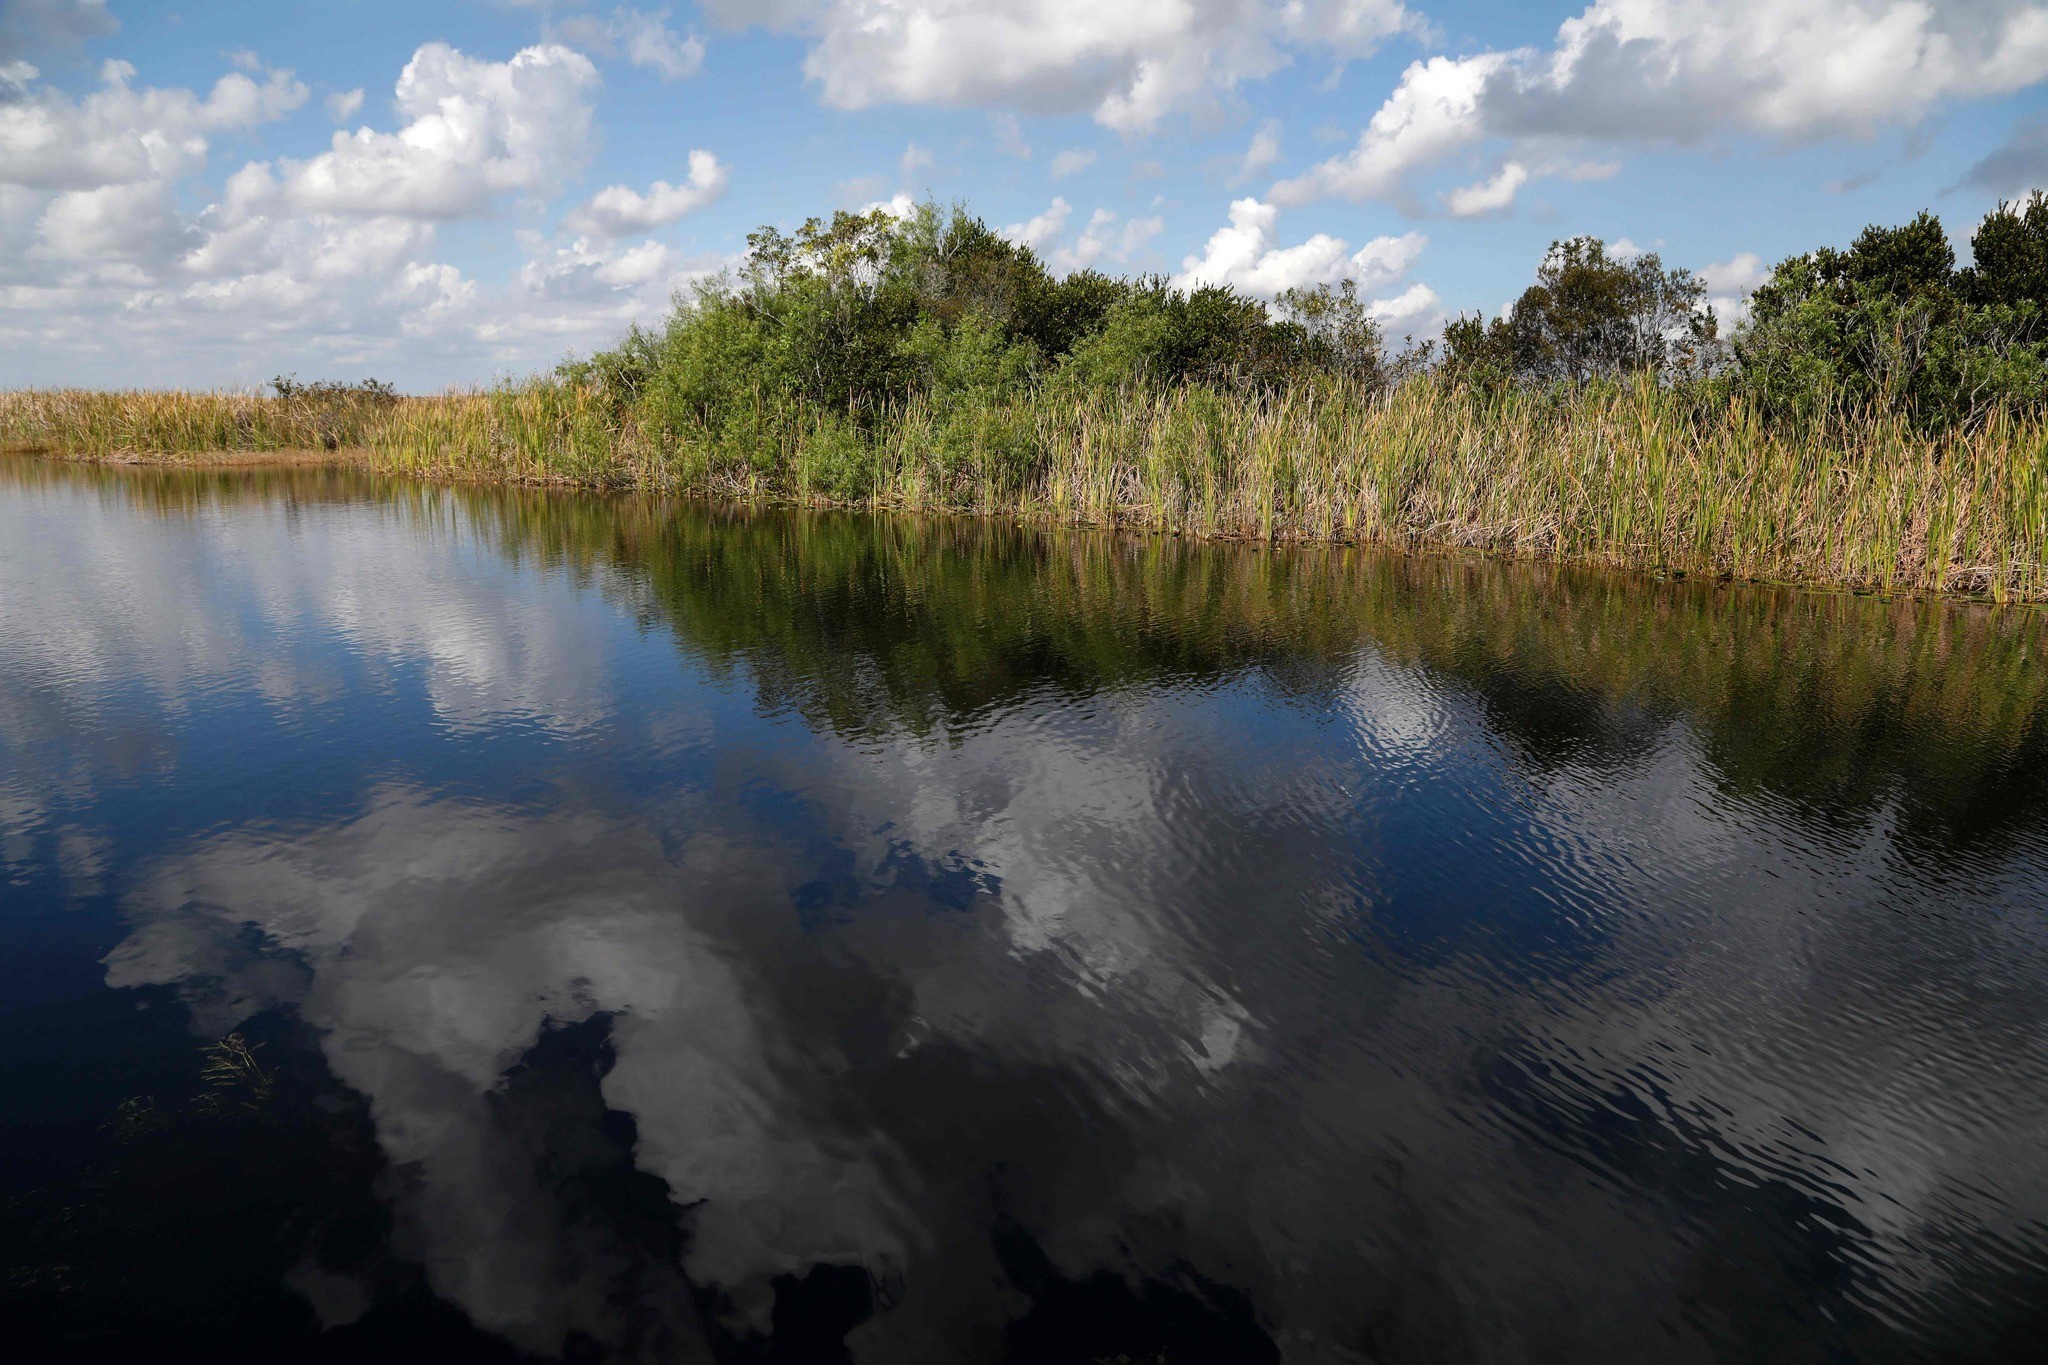 Everglades Leaders Straying From Saving the River of Grass